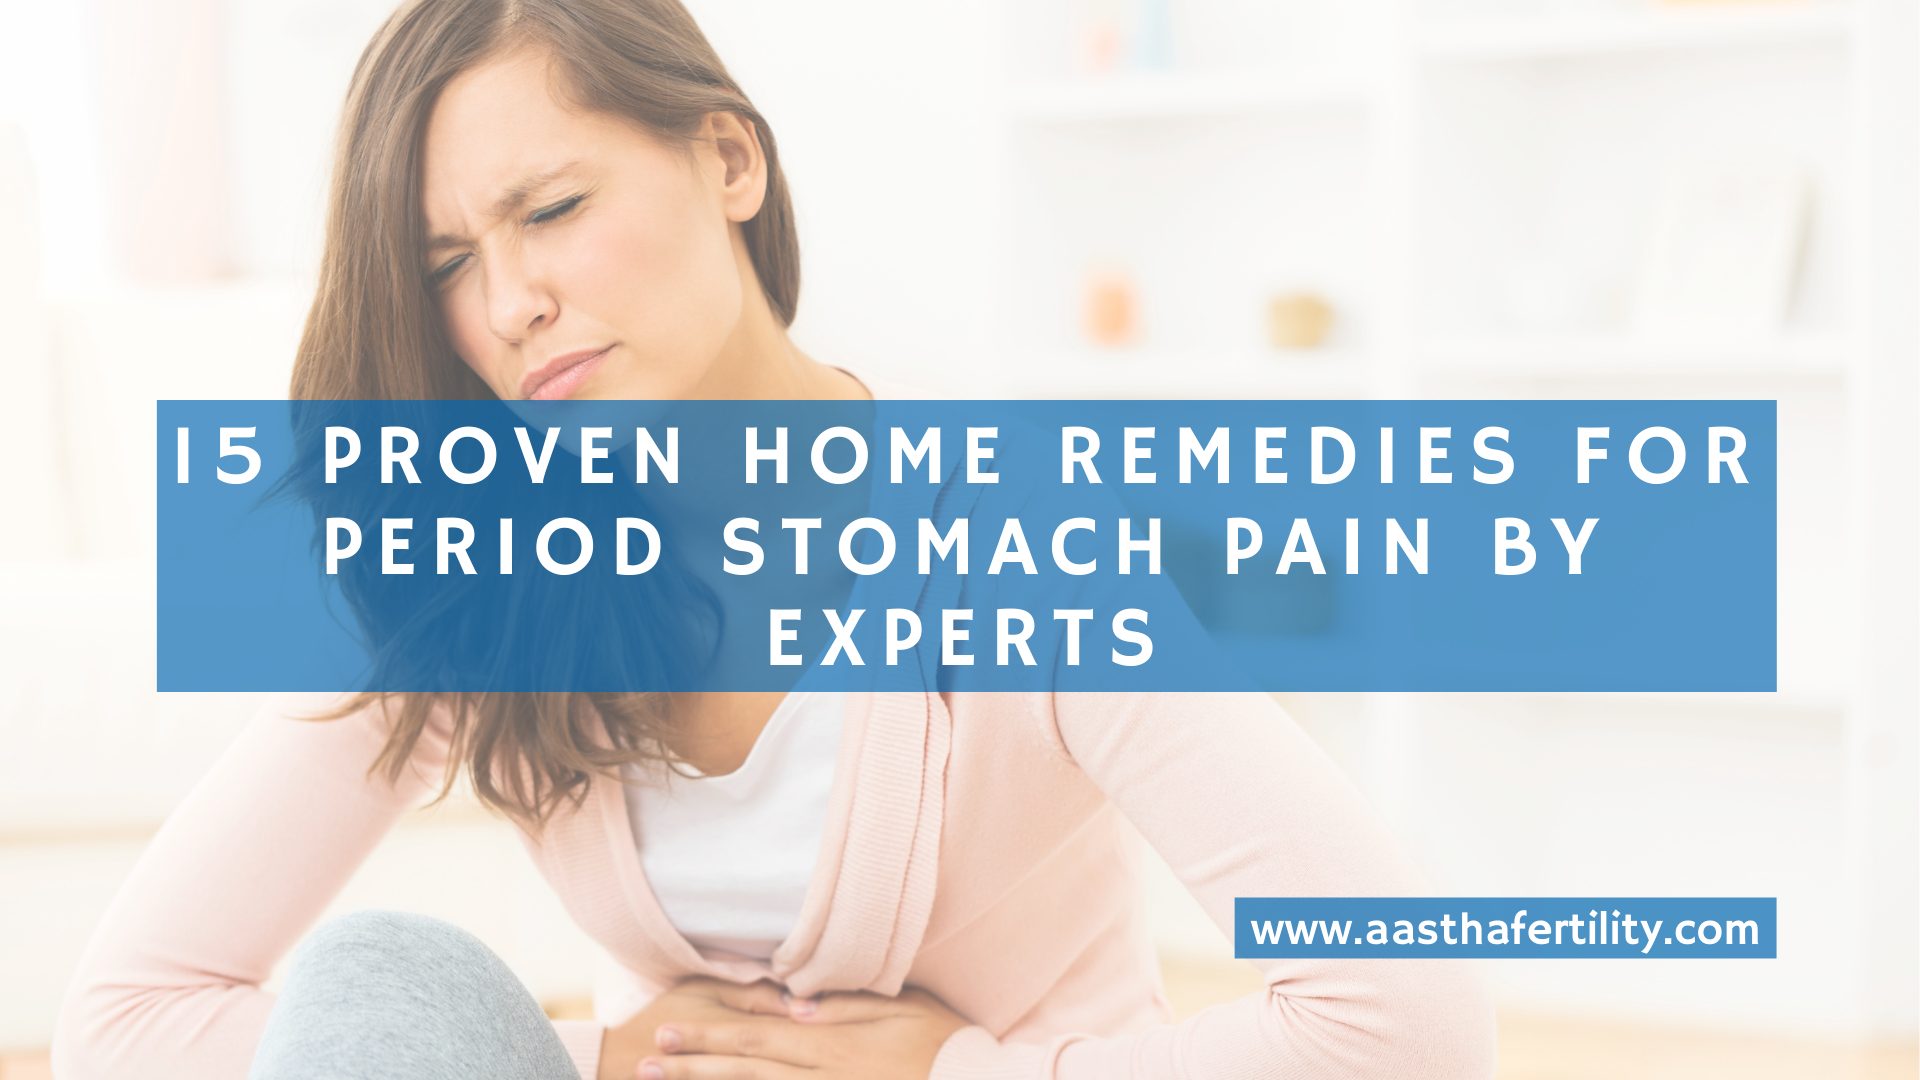 15 Proven Home Remedies for Period Stomach Pain By Experts